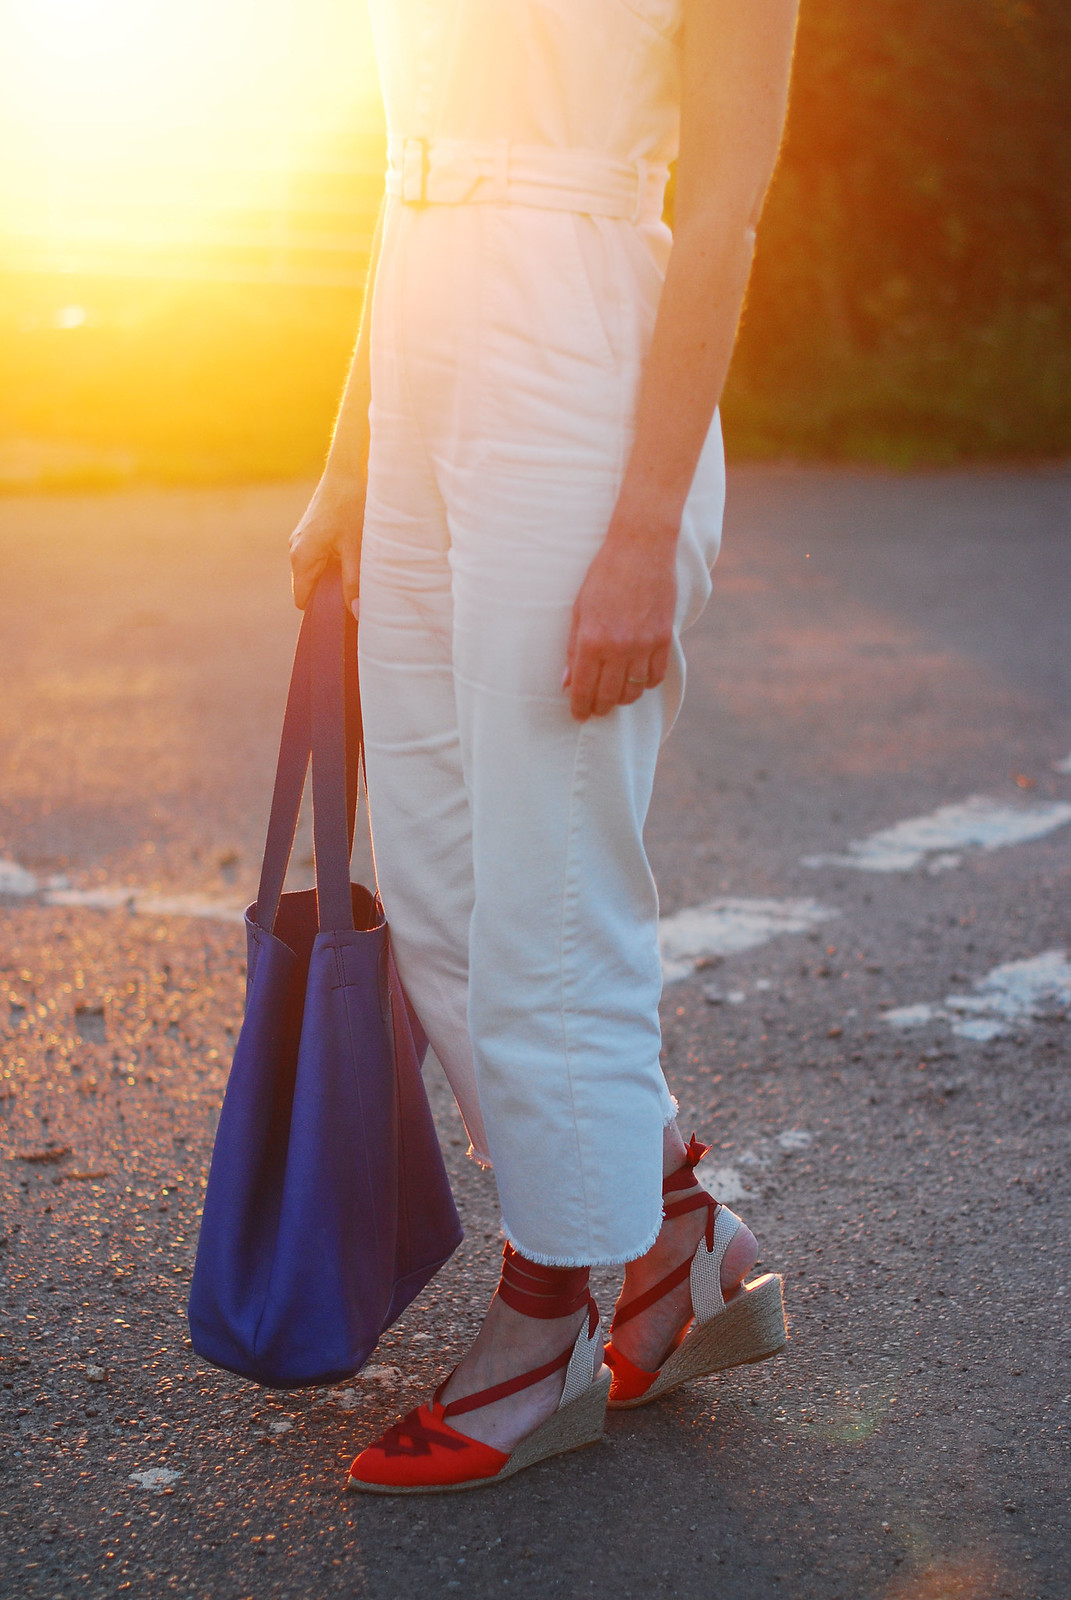 Sleeveless summer overalls: Red, white and blue outfit - red wedge espadrilles, white dungarees, blue slouchy bag | Not Dressed As Lamb